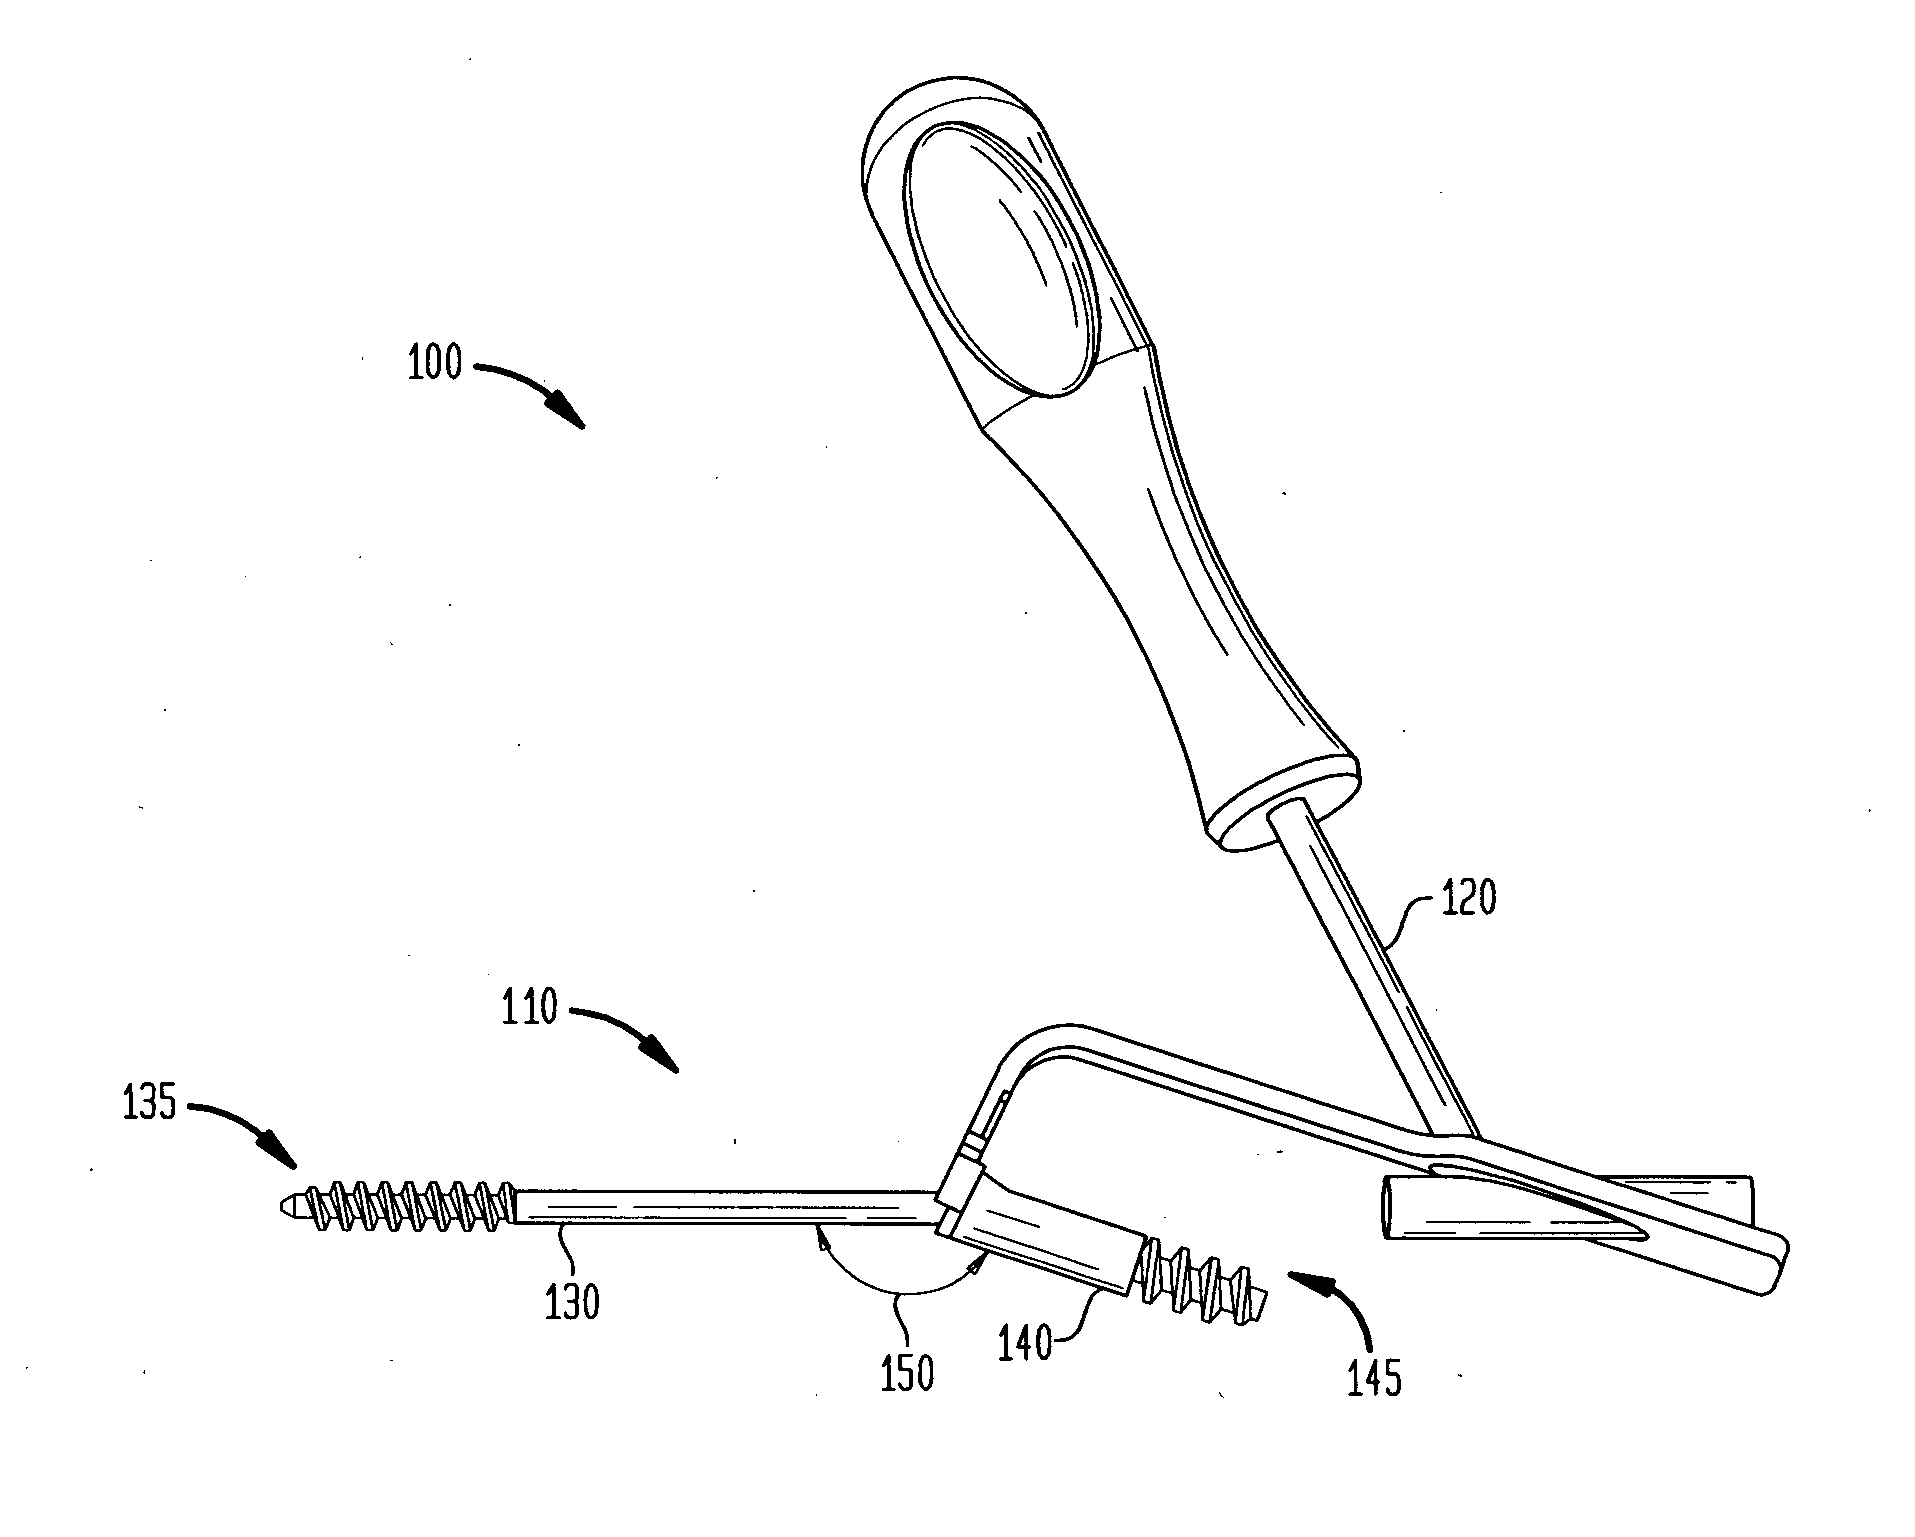 Fixation system, an intramedullary fixation assembly and method of use